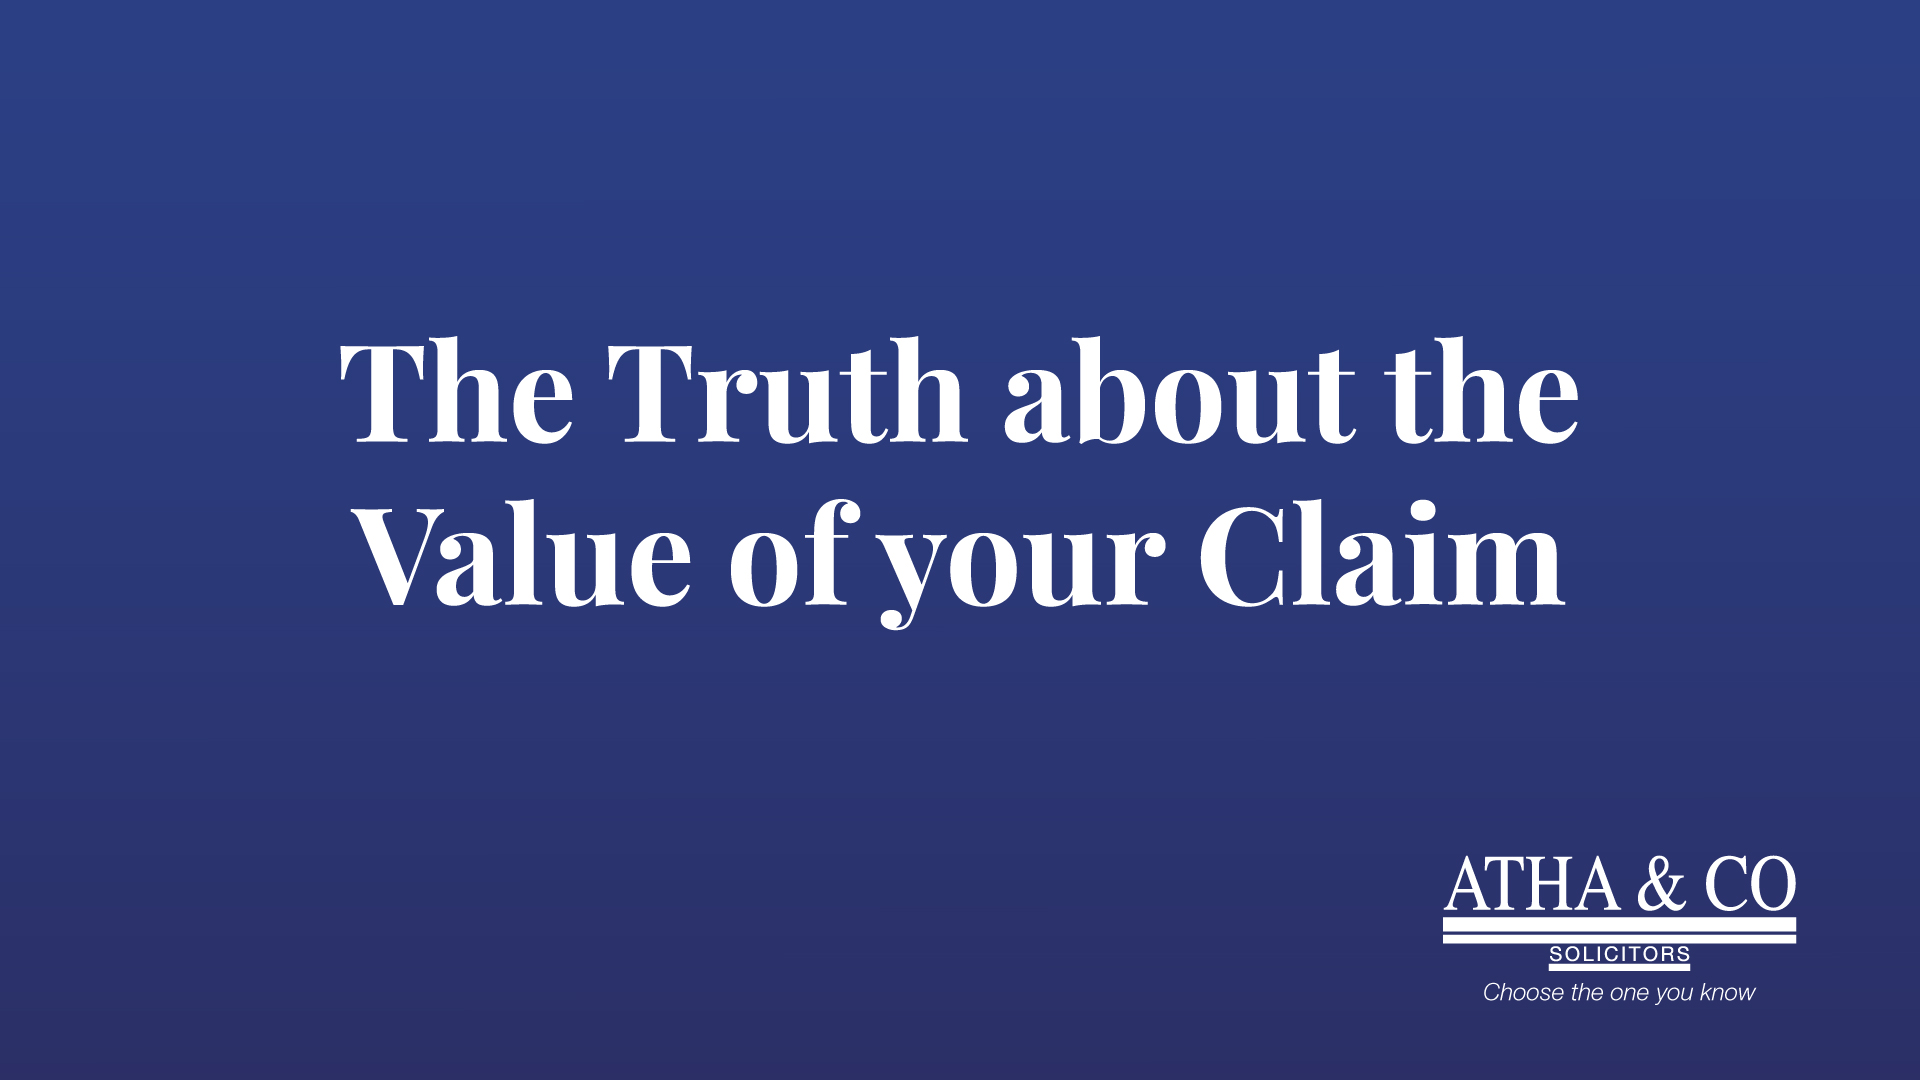 THE TRUTH ABOUT THE VALUE OF YOUR CLAIM